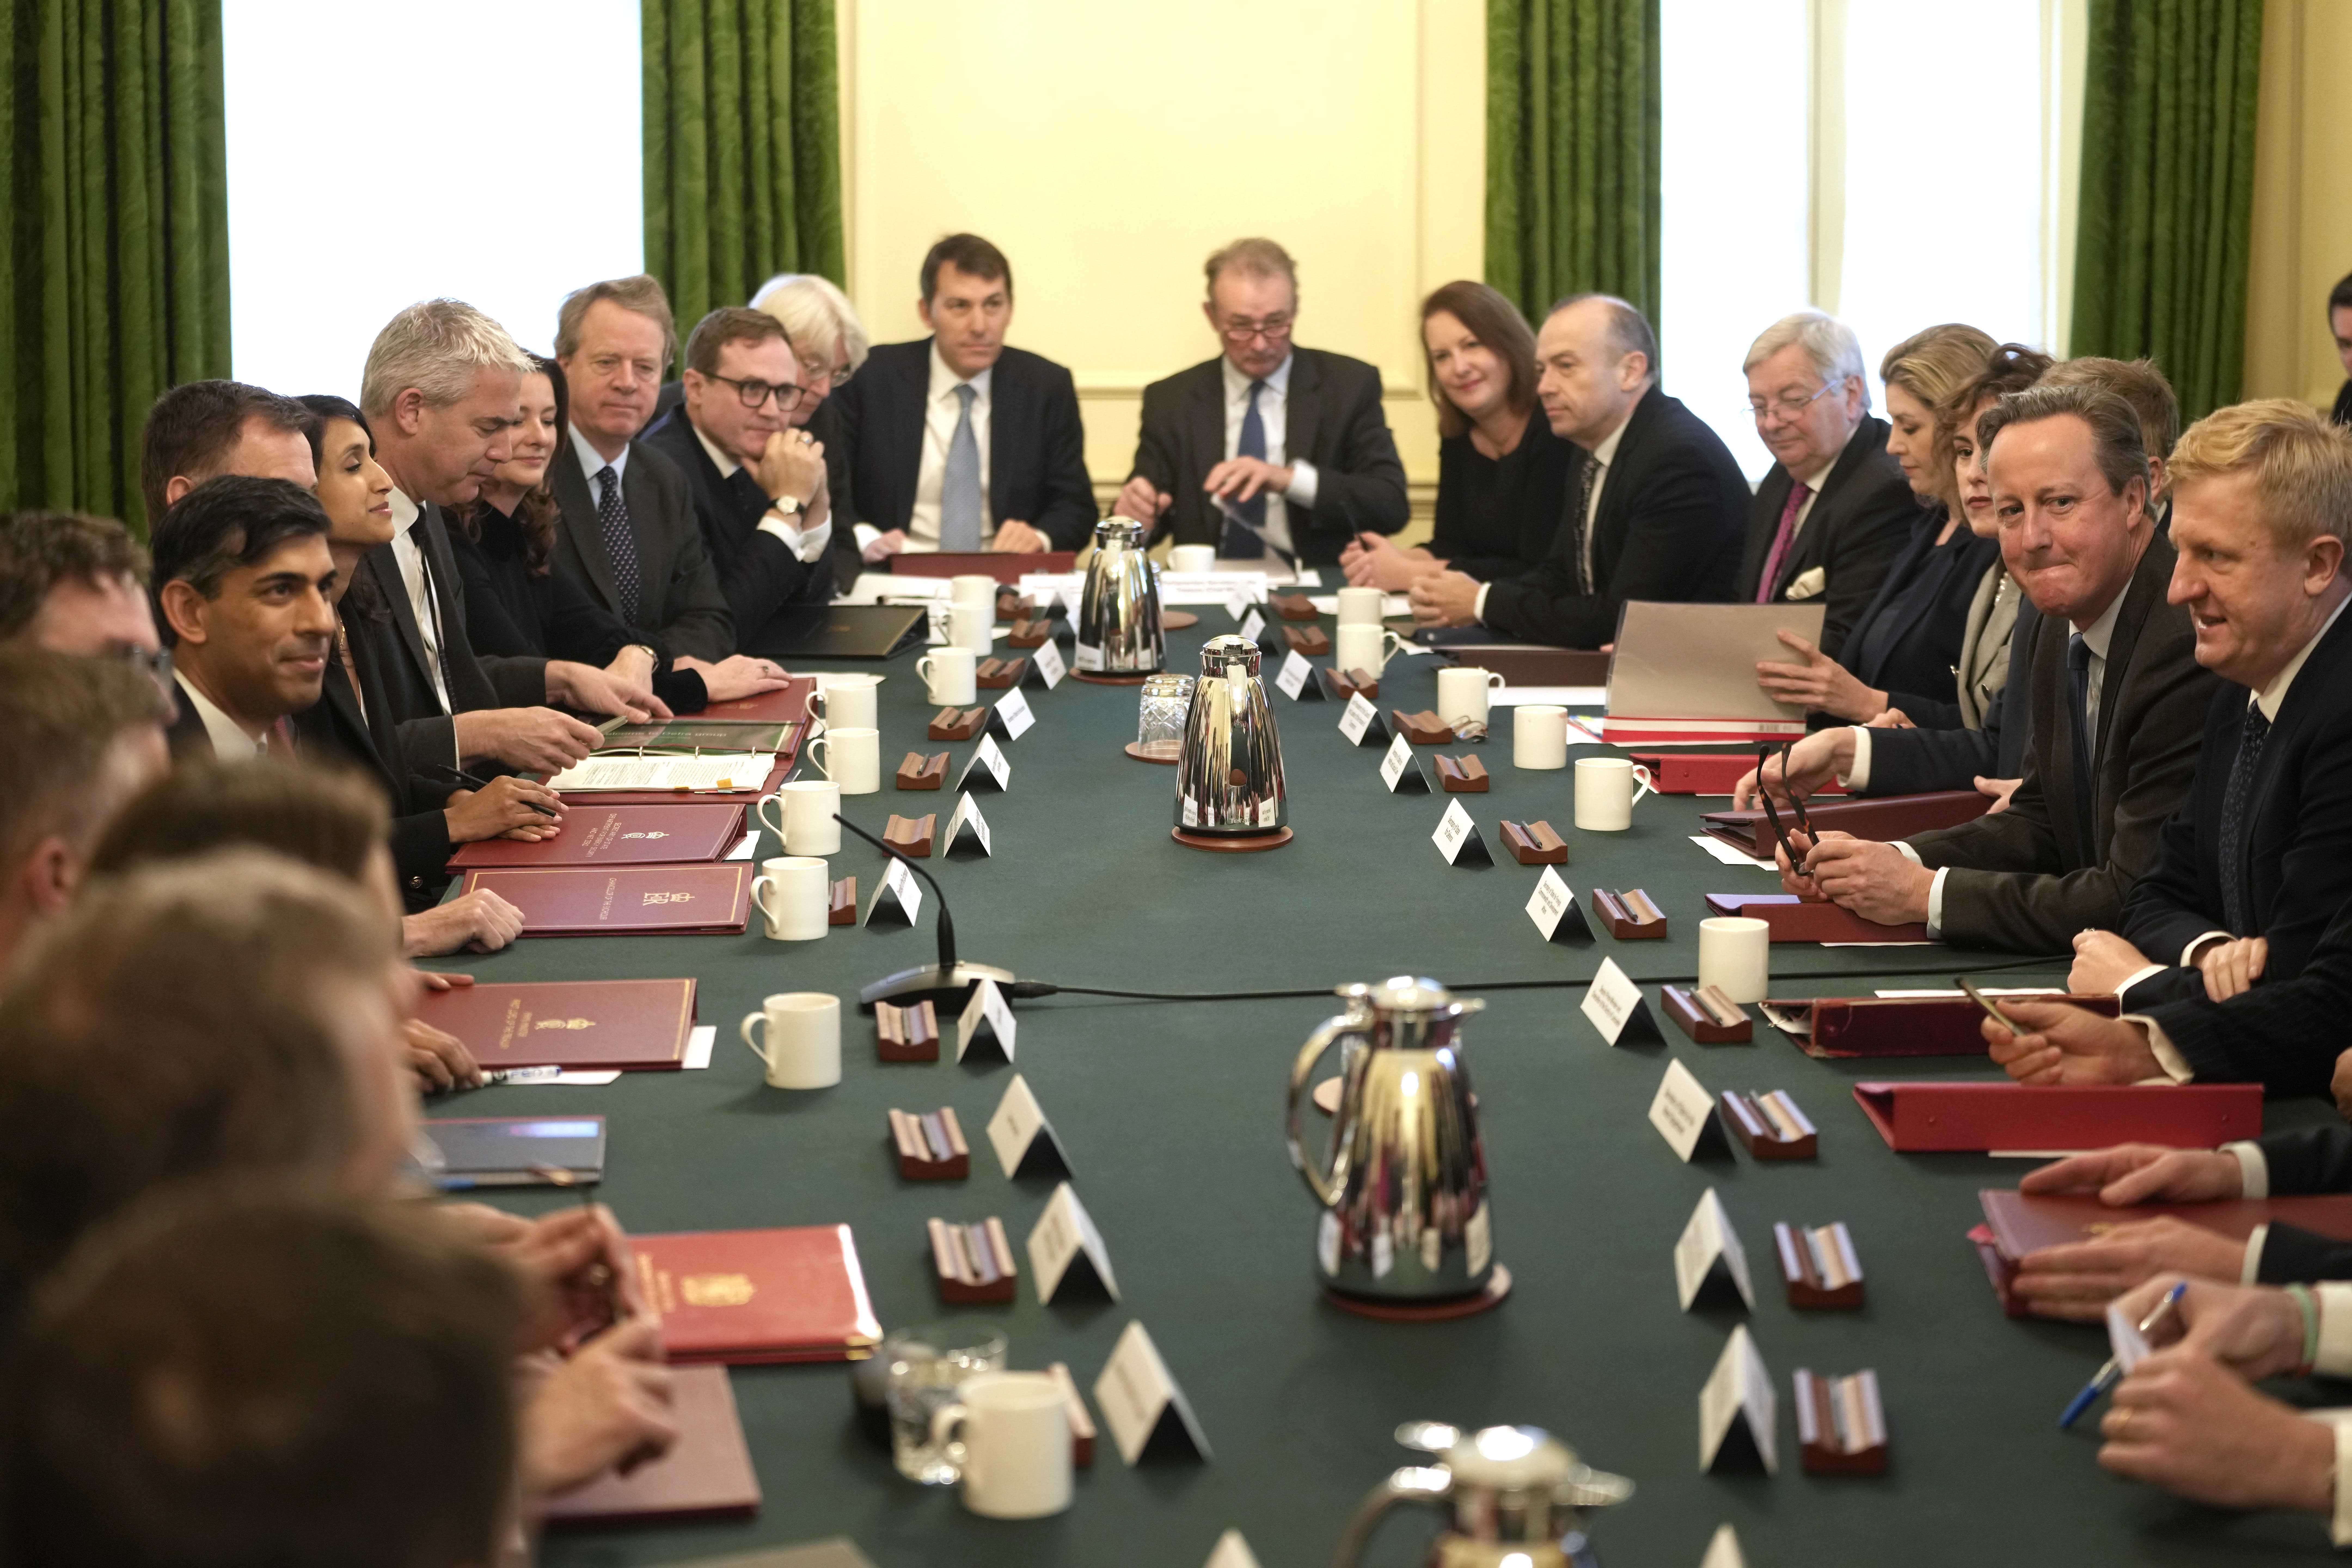 A meeting of the new-look cabinet following Sunak’s reshuffle